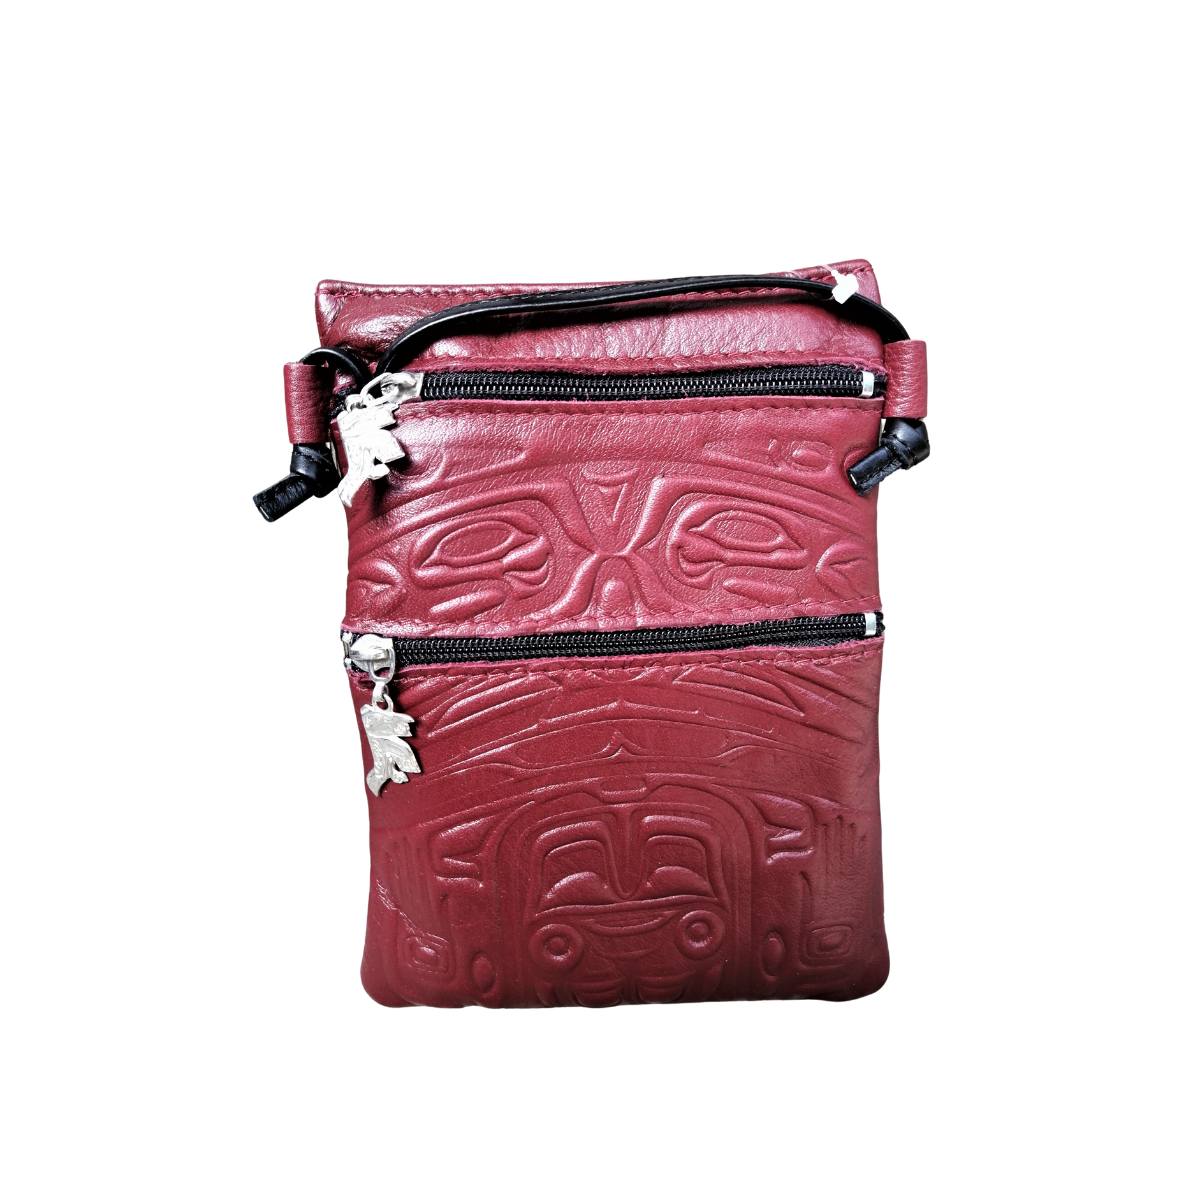 Embossed Passport Pouch Bear Box Design (Red Leather) - Embossed Passport Pouch Bear Box Design (Red Leather) -  - House of Himwitsa Native Art Gallery and Gifts